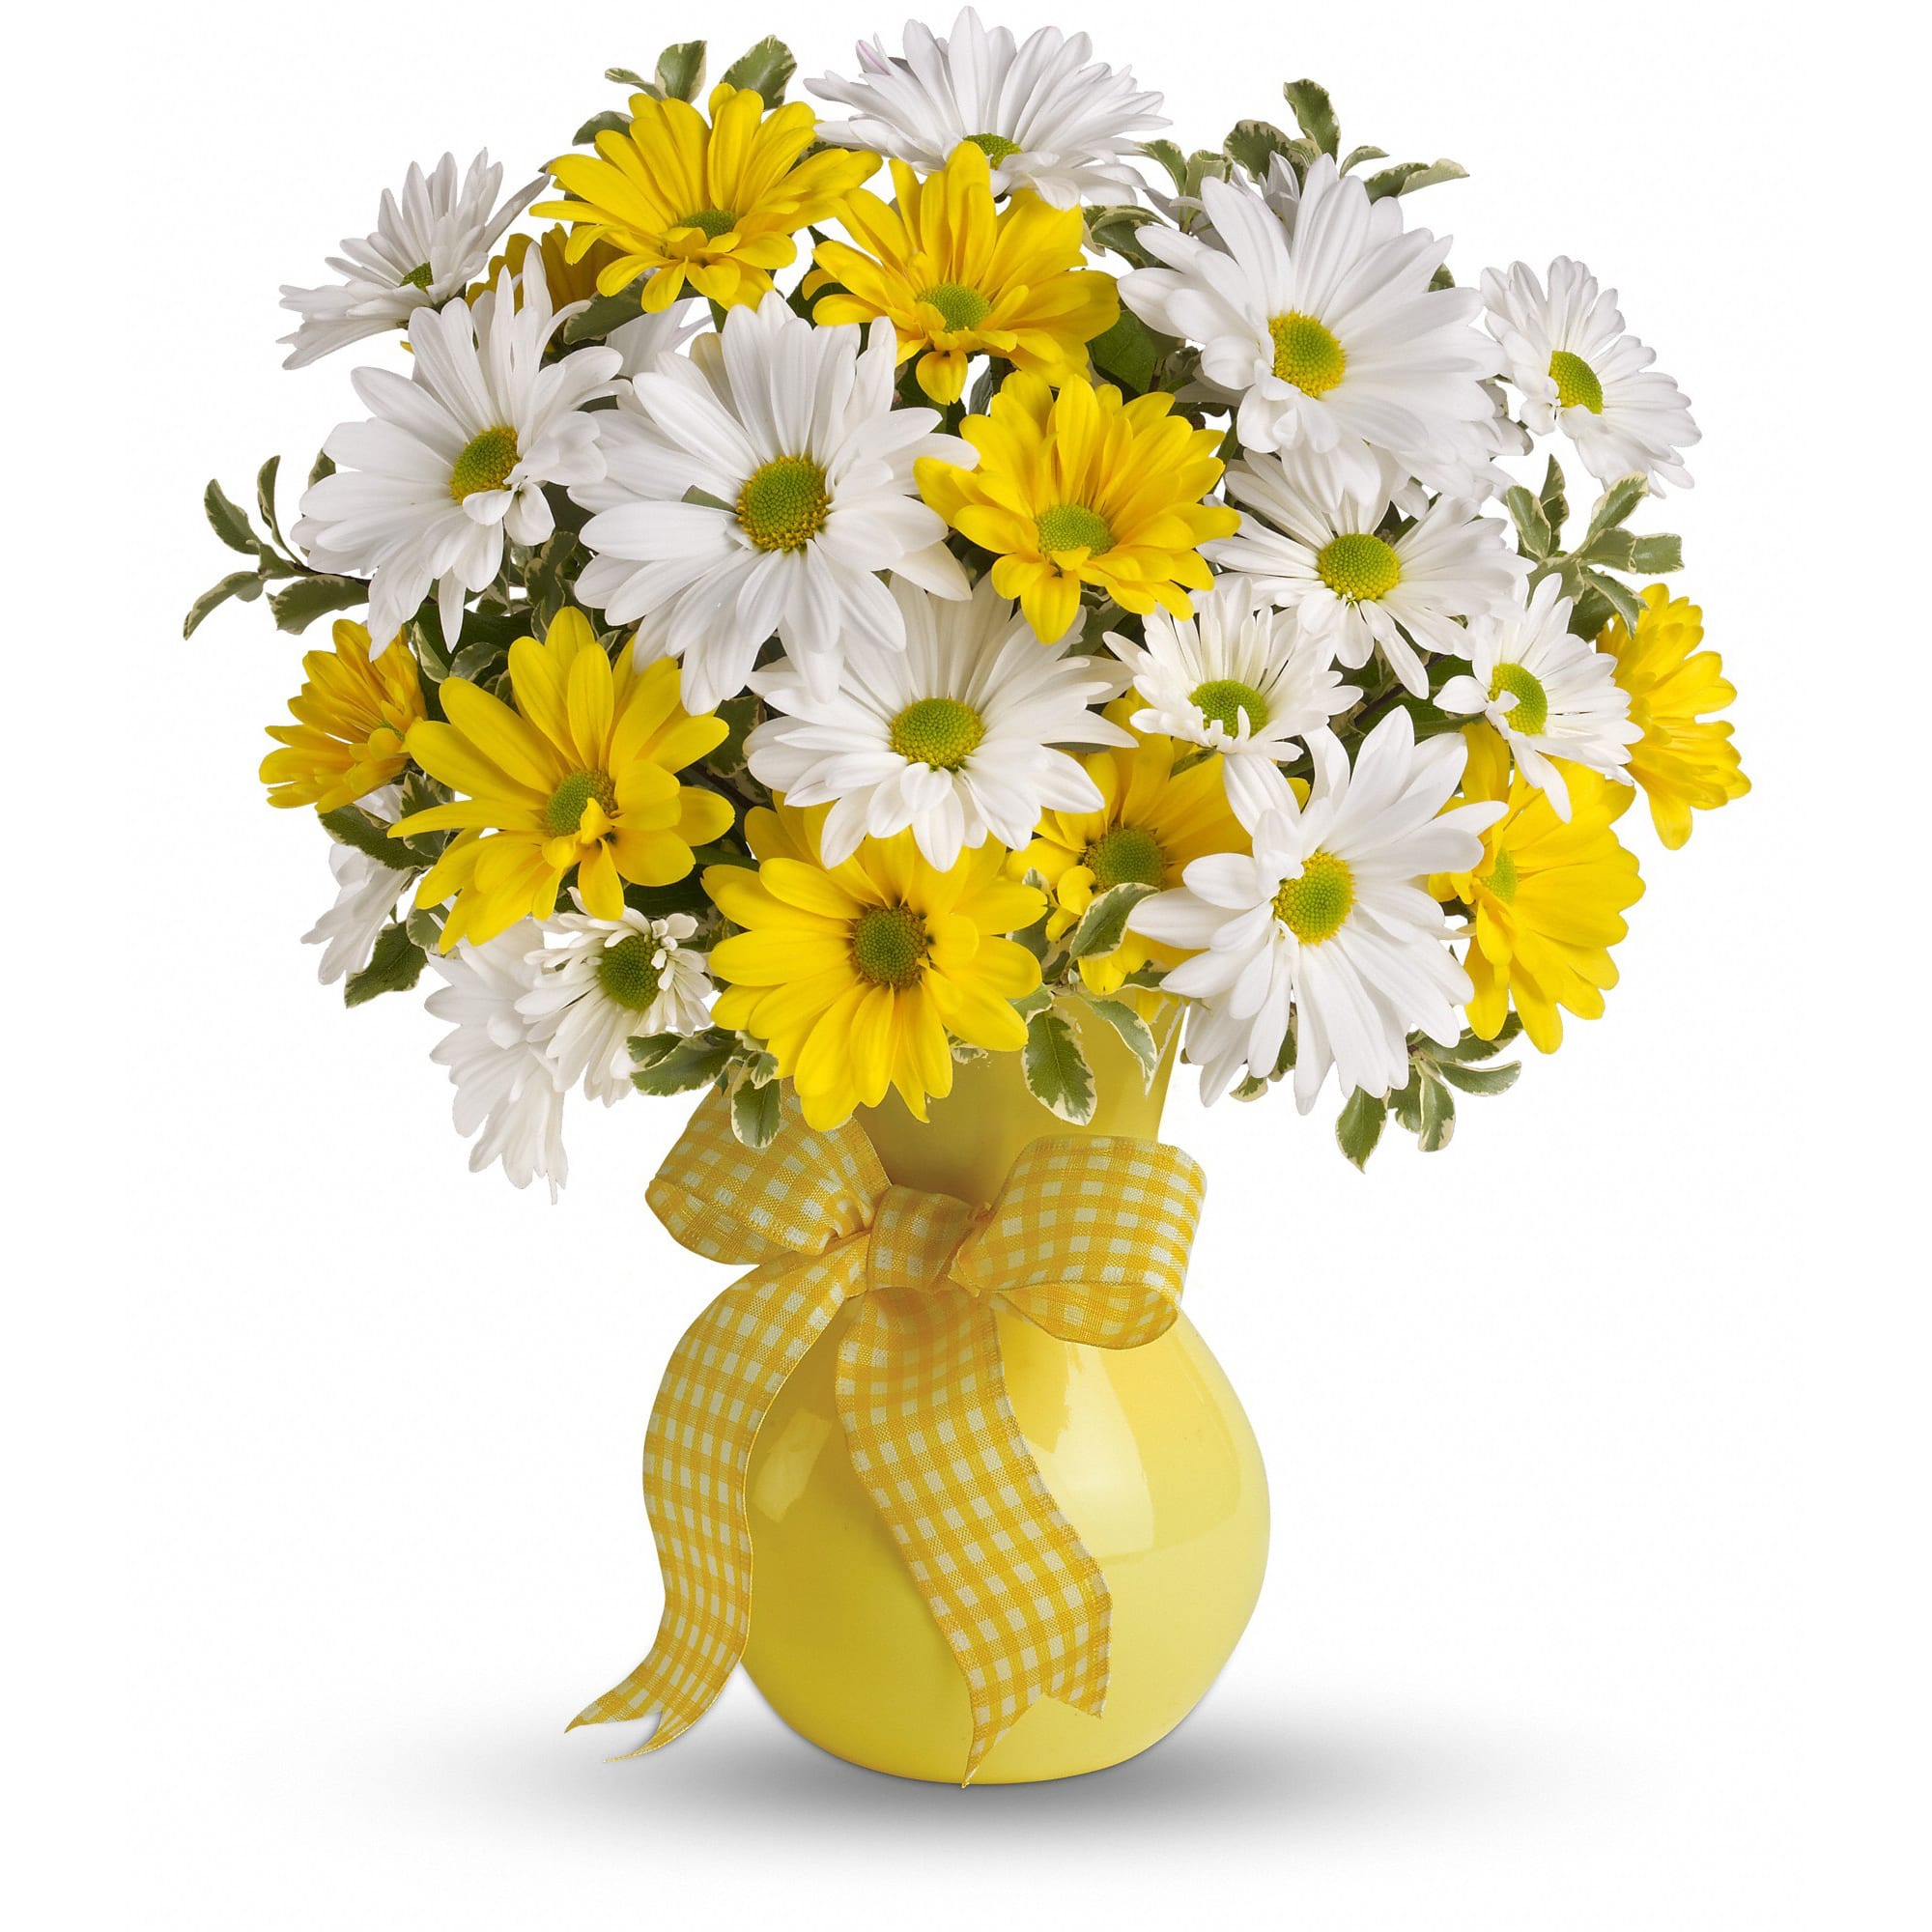 Teleflora's Upsy Daisy - What could be sweeter than a cheerful yellow vase filled with white and yellow daisies? Can't think of anything? Then choose this sunny bouquet. It will brighten their day.  